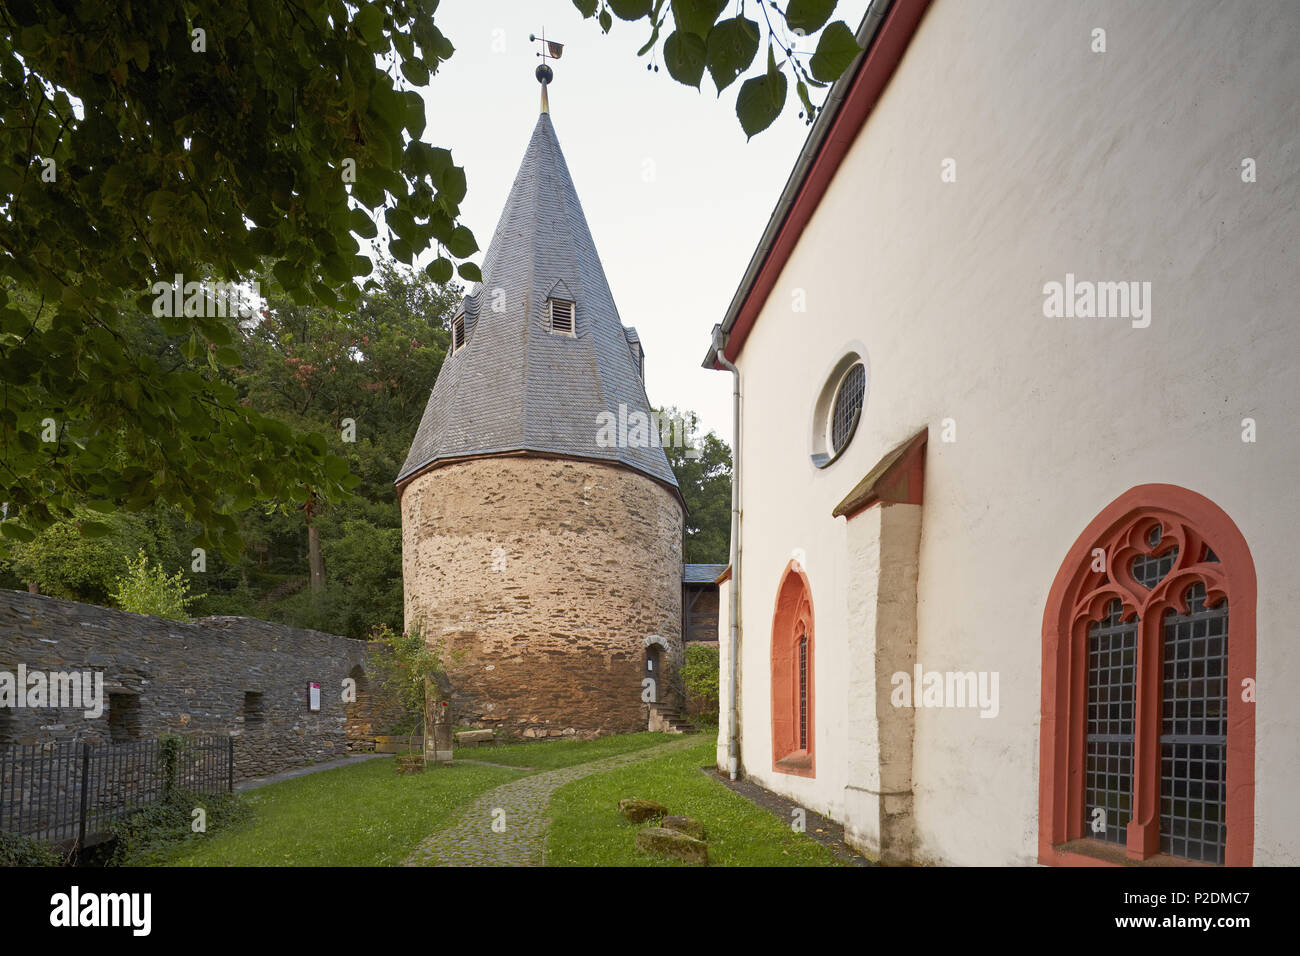 Castle church and belfry at Herrstein, Administrative district of Birkenfeld, Region of Hunsrueck, Rhineland-Palatinate, Germany Stock Photo